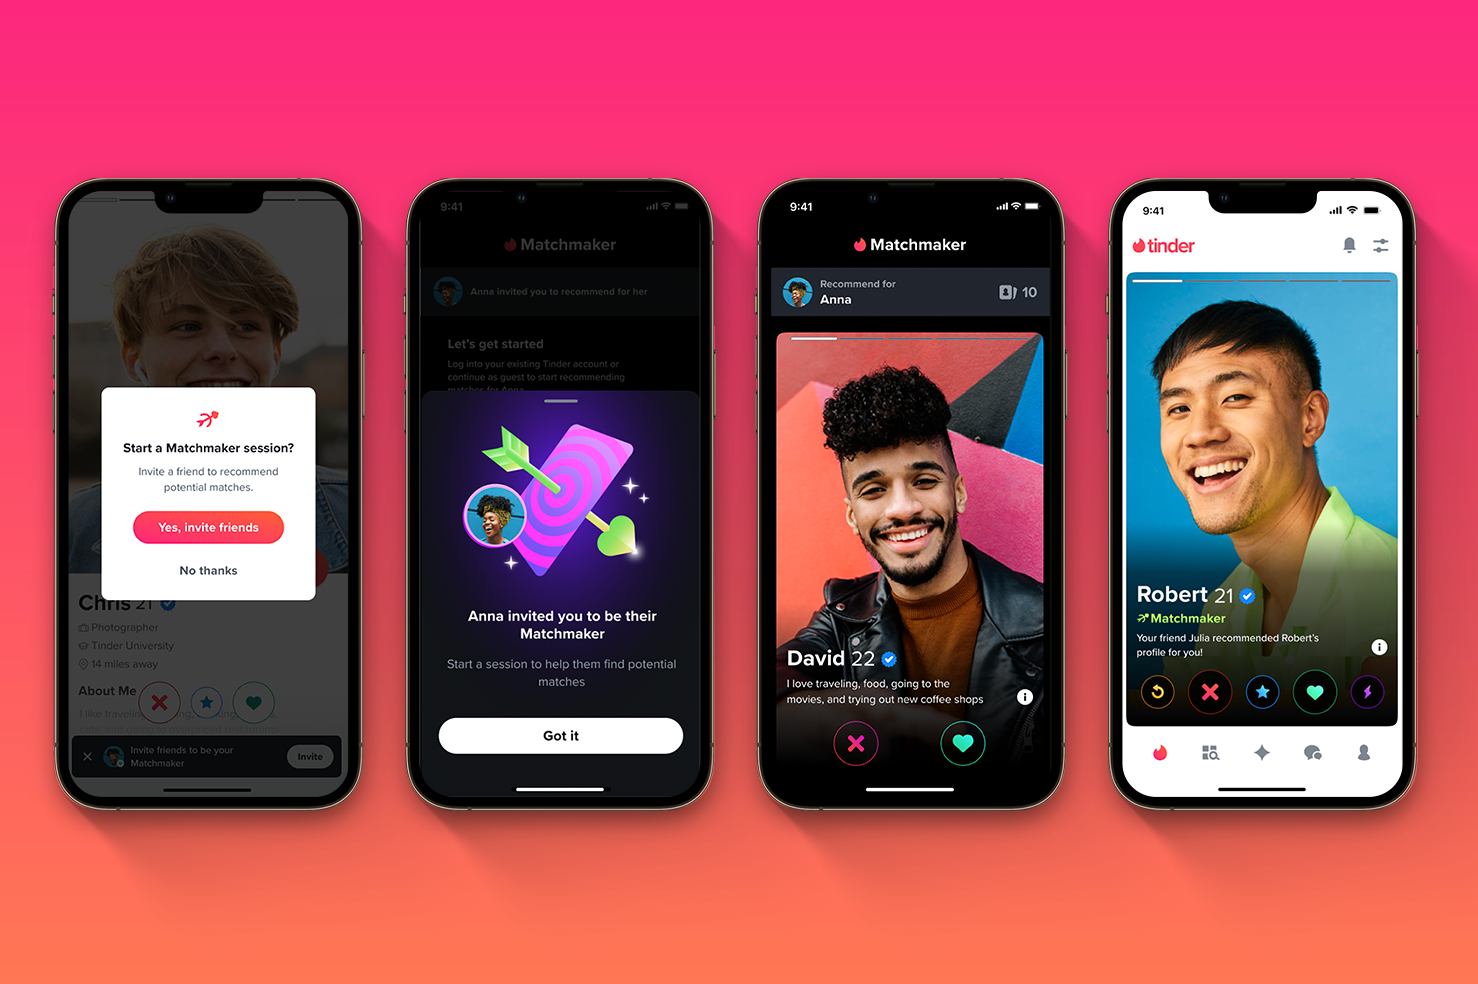 Tinder’s app gets more social by letting friends play matchmaker